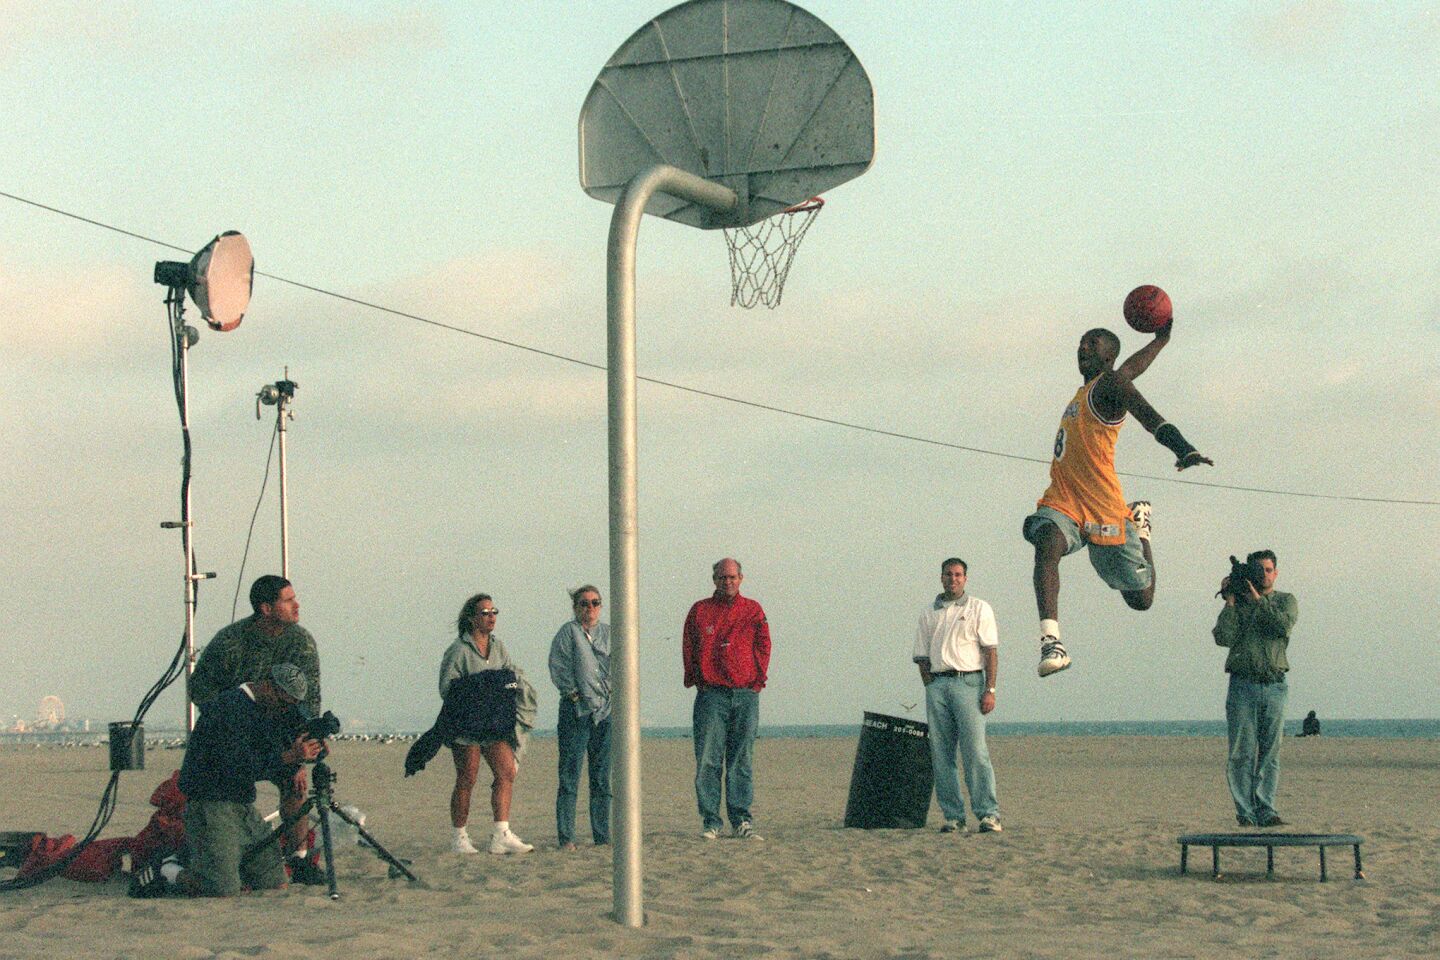 An airborne Kobe Bryant goes for a dunk while shooting a commercial.